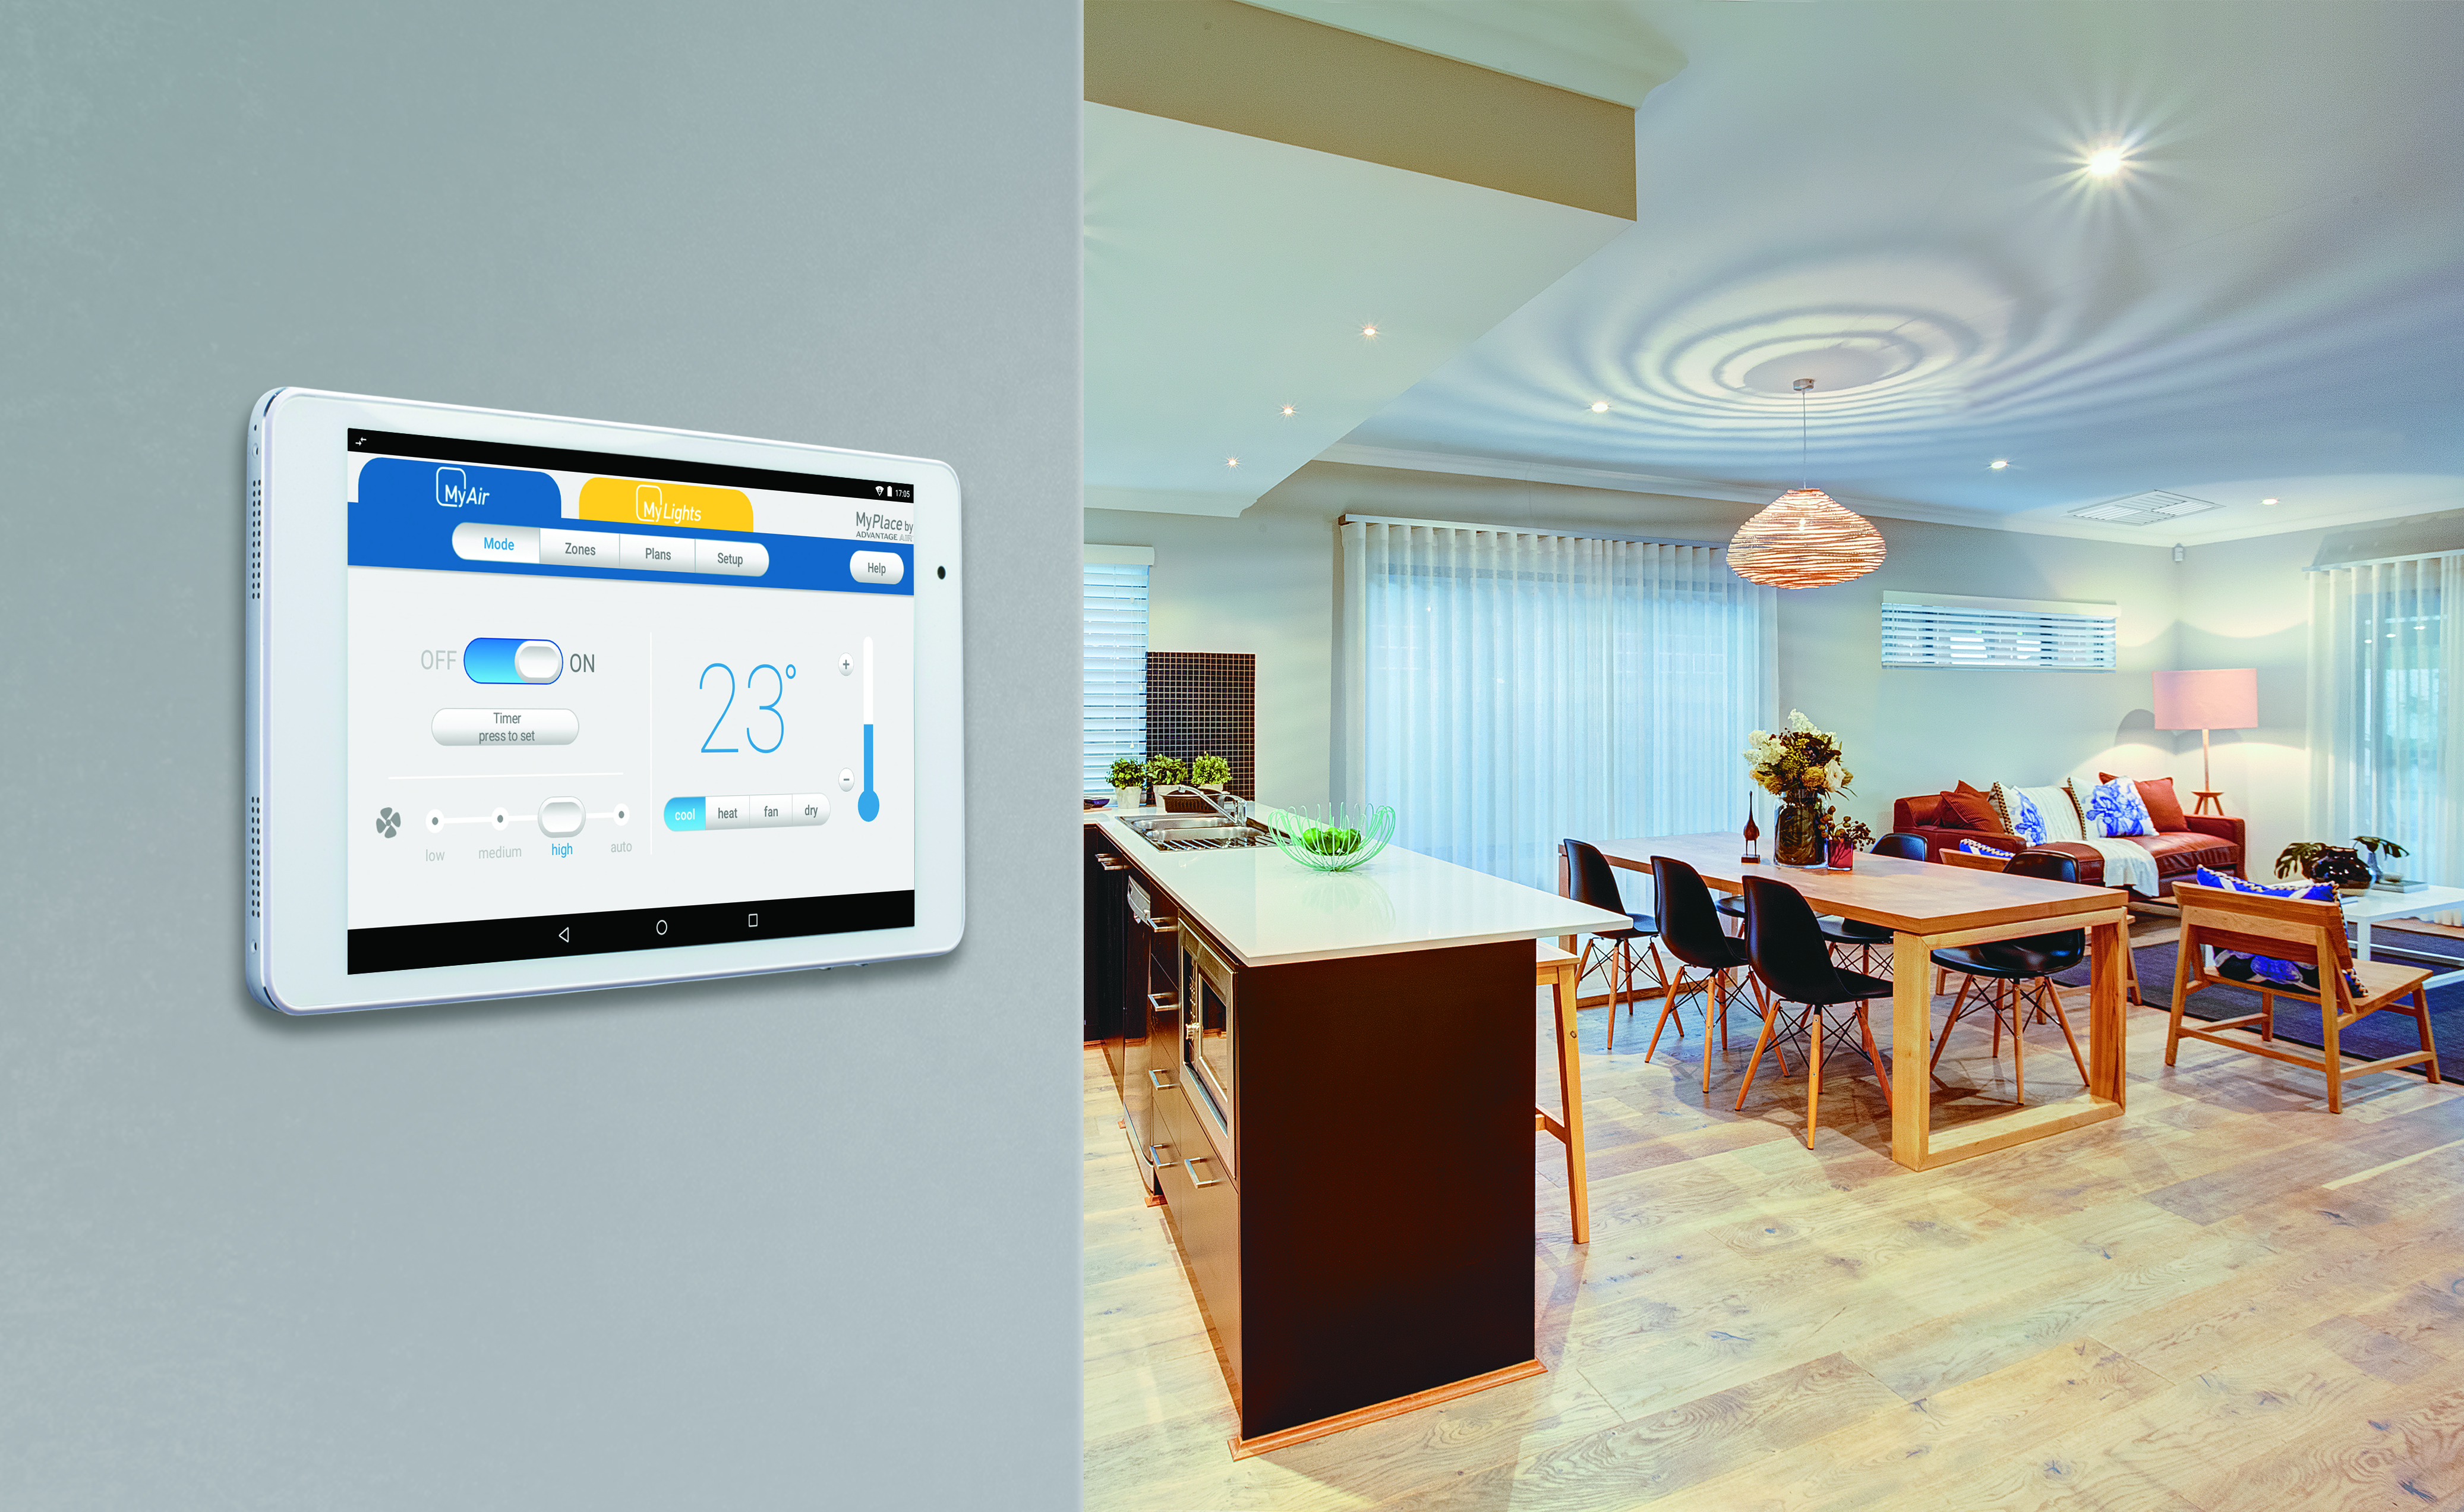 MyAir air conditioning management system